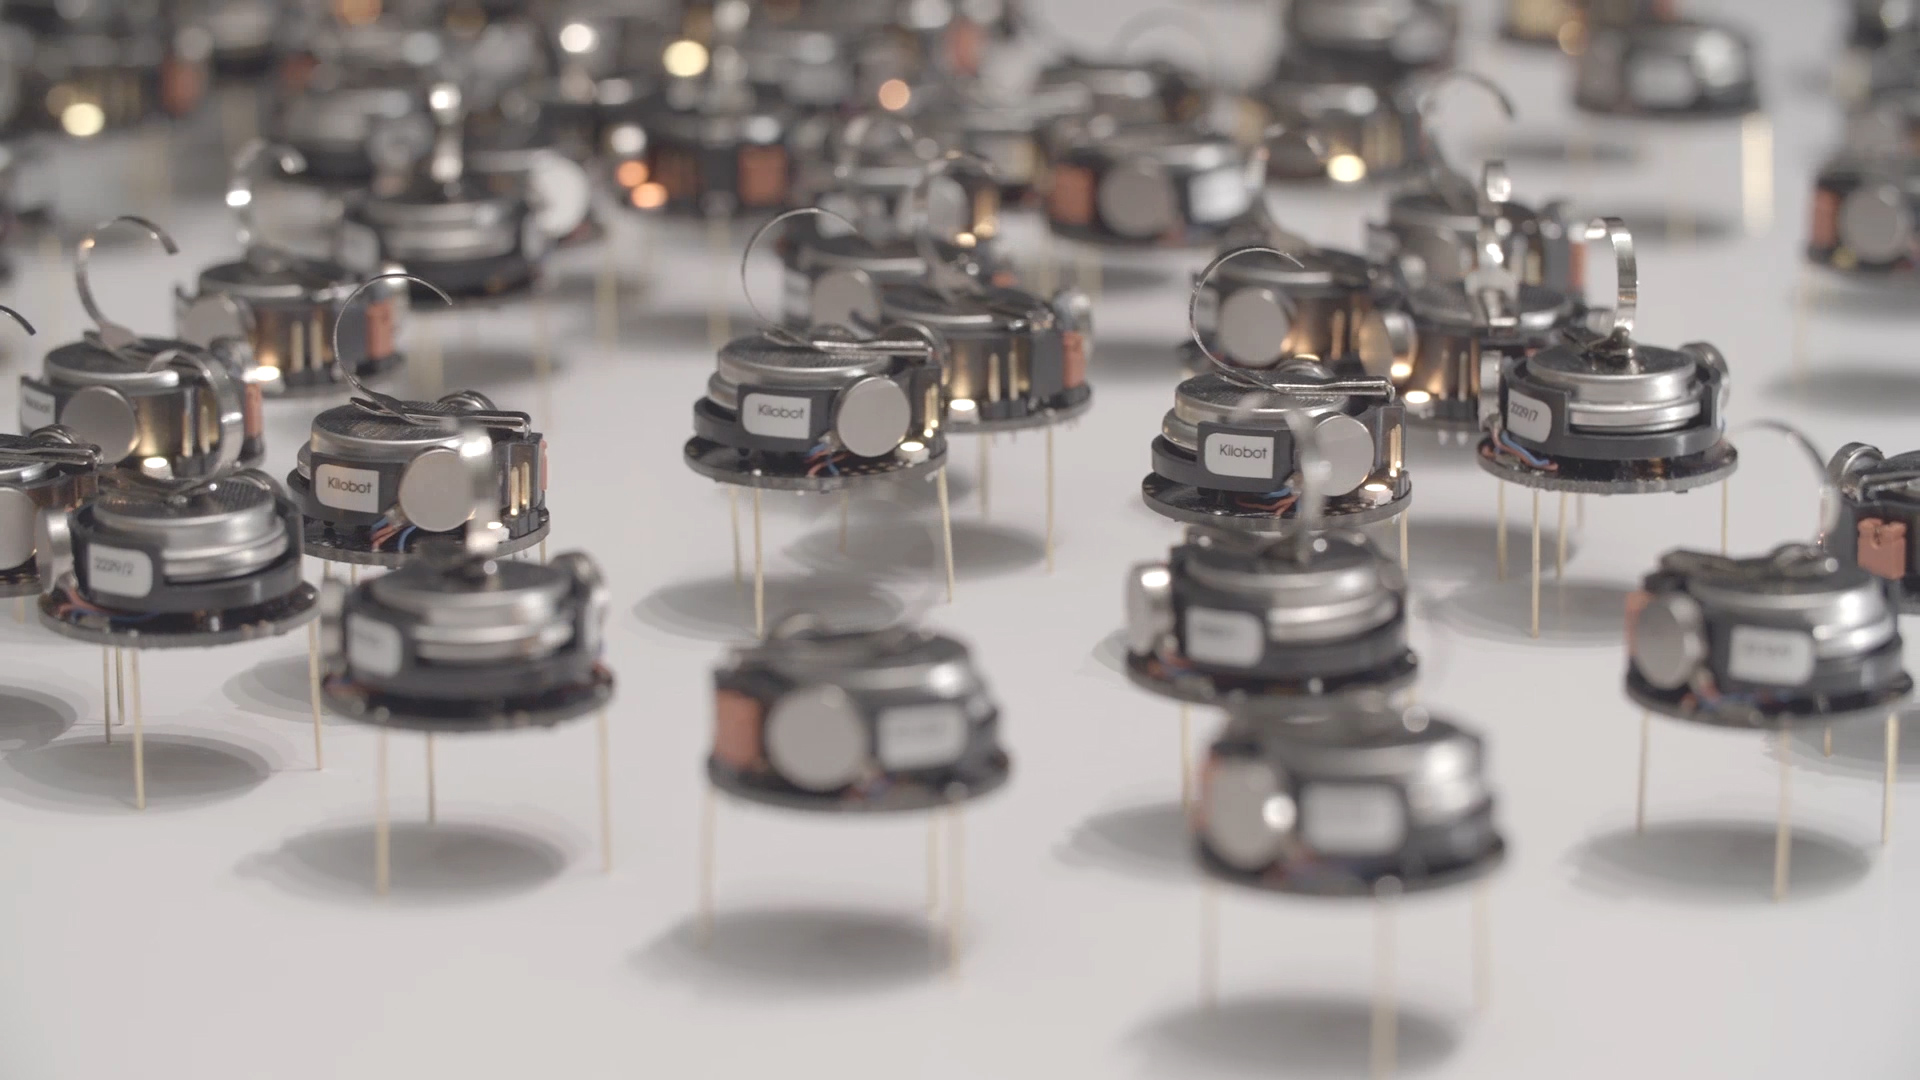 Because kilobots are made from inexpensive parts, they don’t all behave the same way. Some of the 1,000+ robots in the swarm inevitably have faulty components or connections. As a result, engineers must write programs to control the swarm that can handle a few robots making errors or failing altogether.